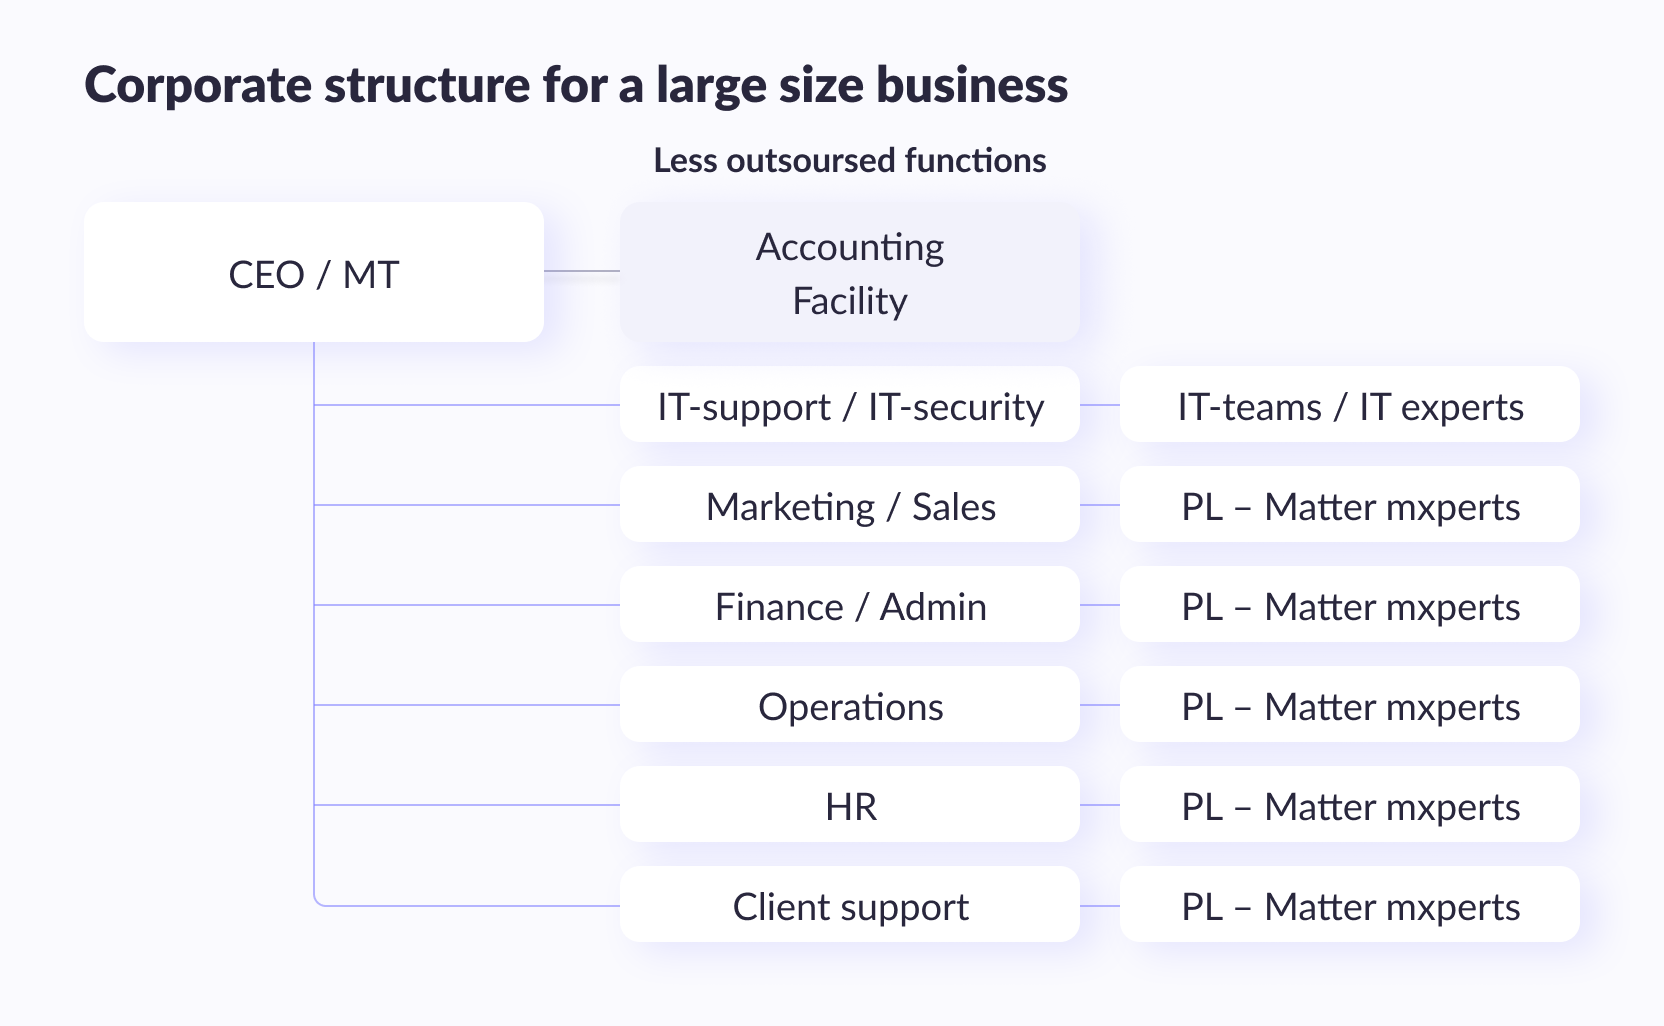 Corporate structure for a large size business